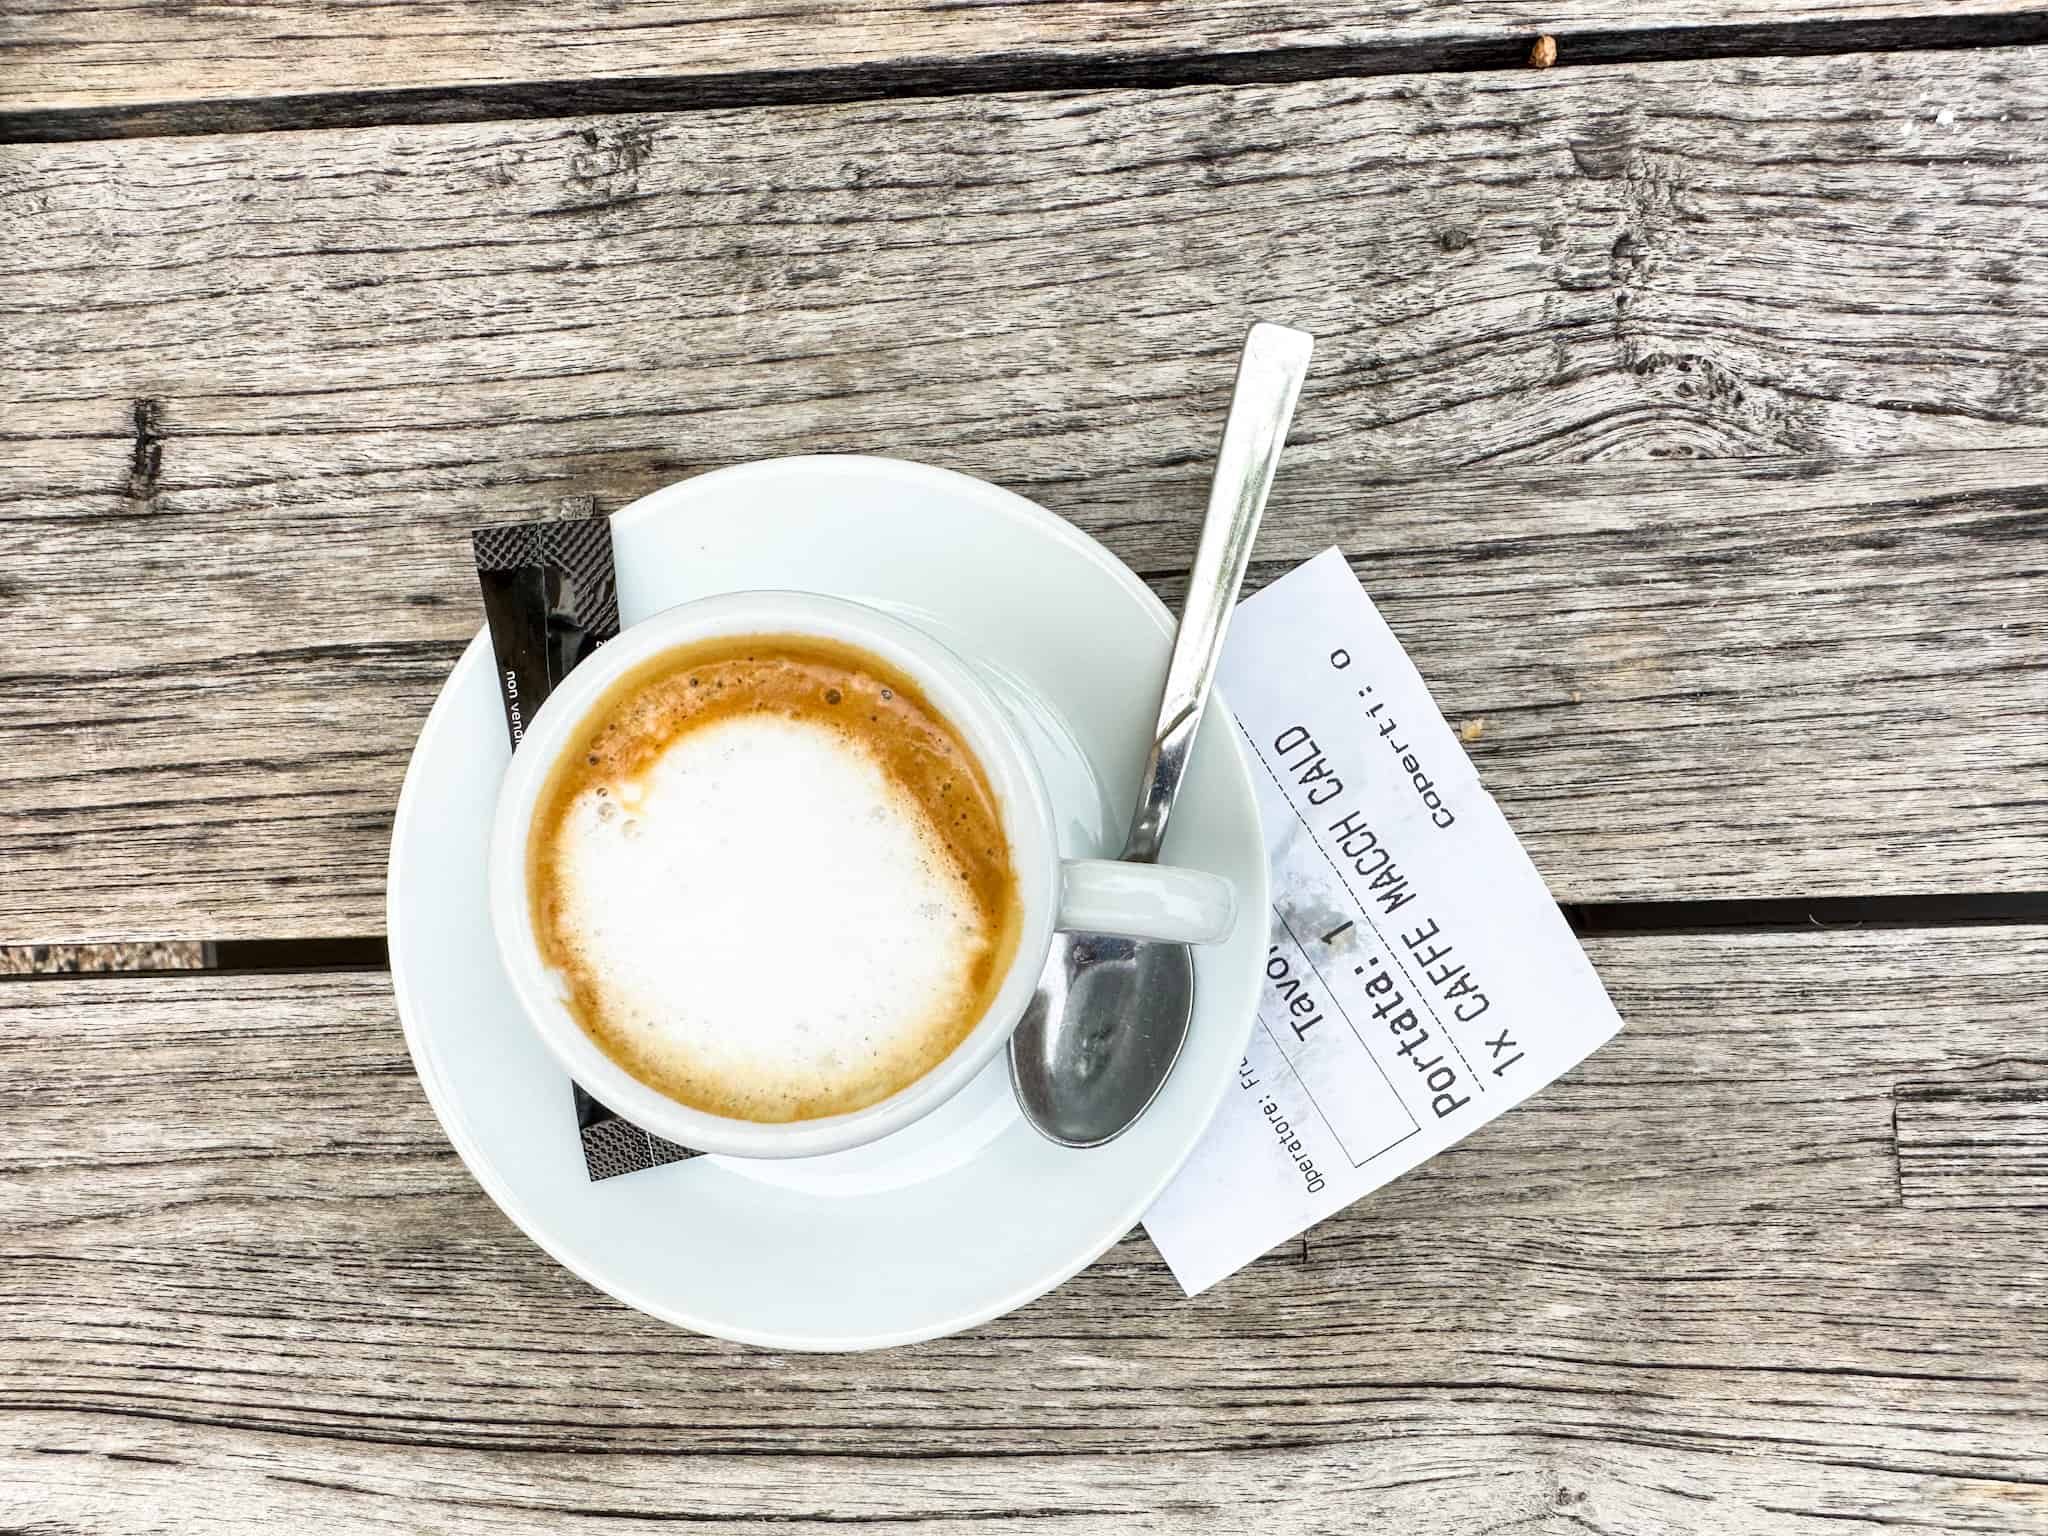 top view of cappuccino in a saucer with a spoon on side and receipt under saucer on a wooden table from top view